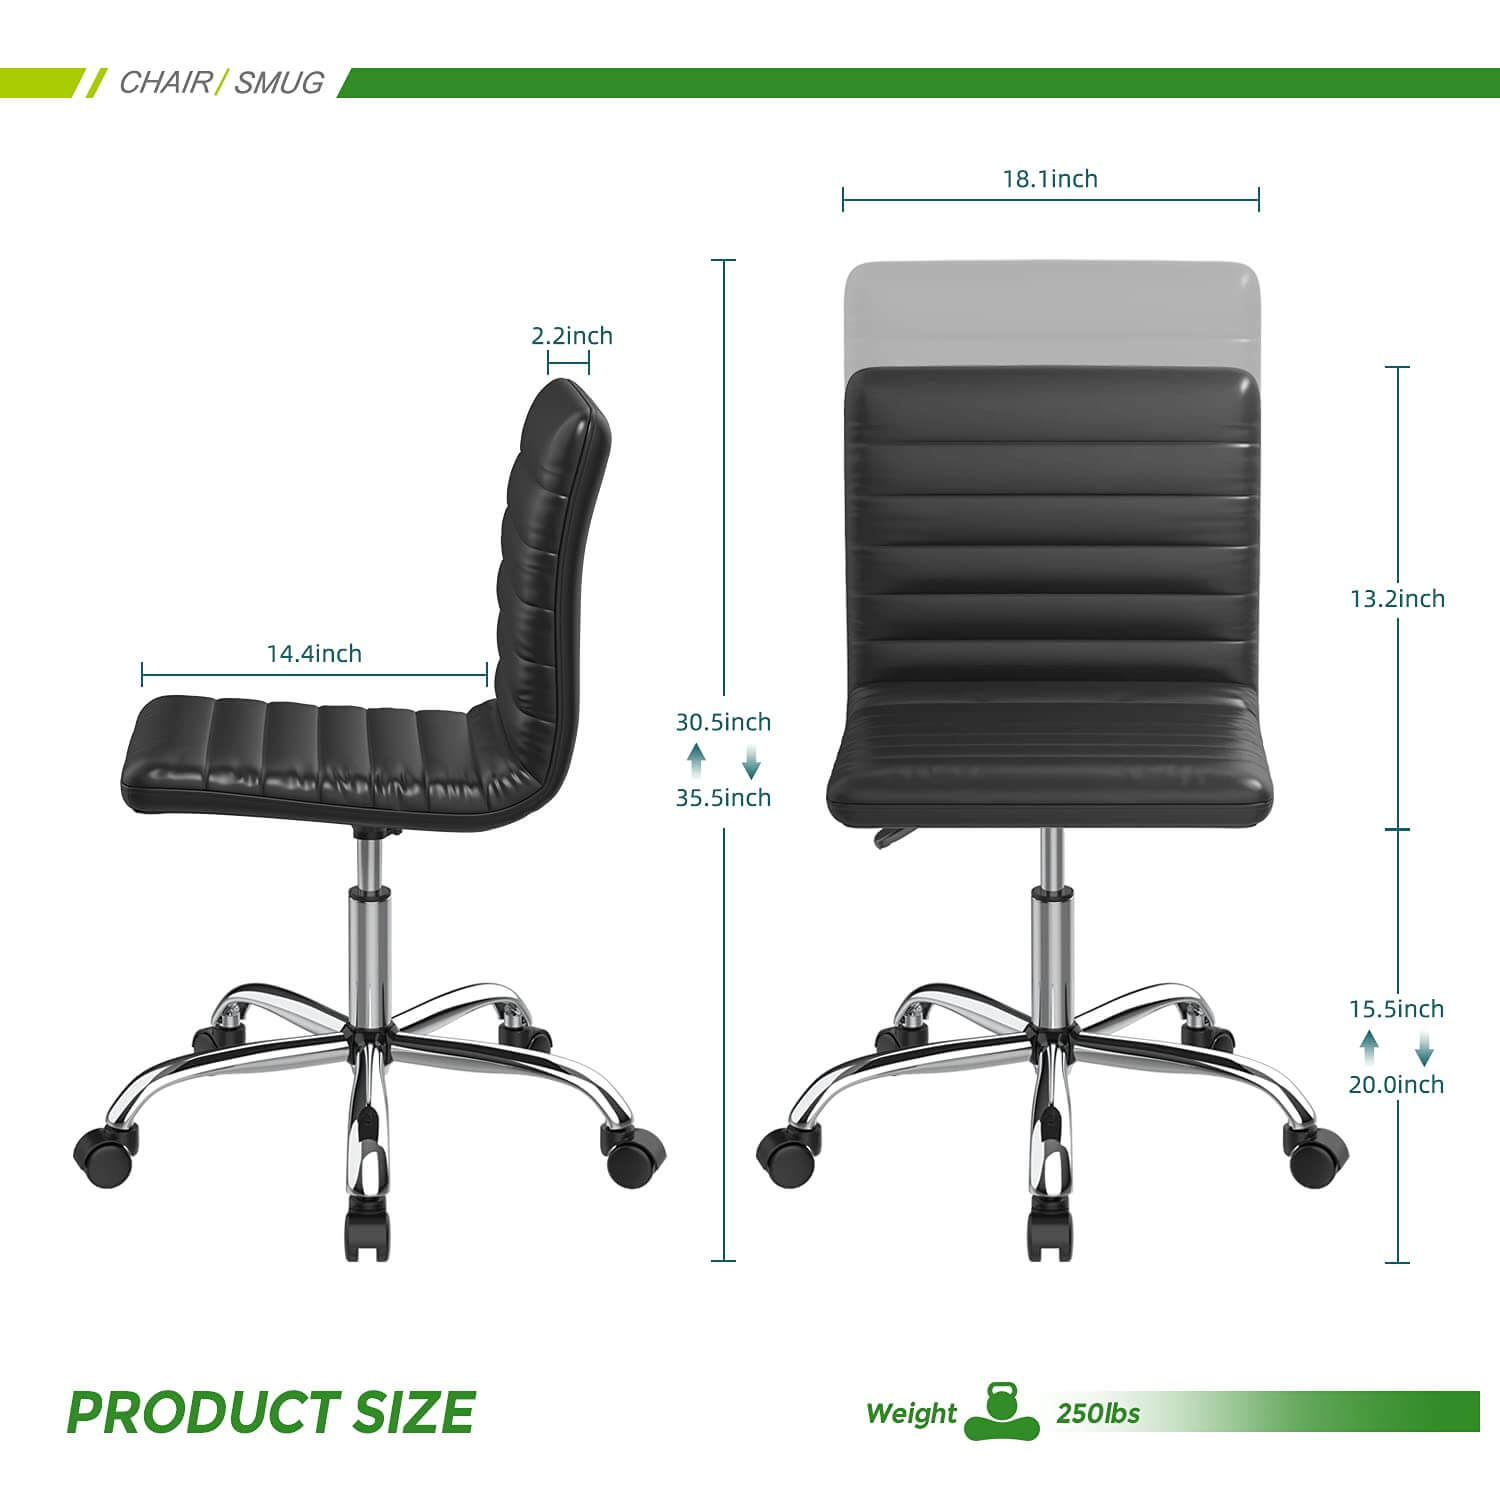 leather-swivel-office-chair-adjustable#Color_Black